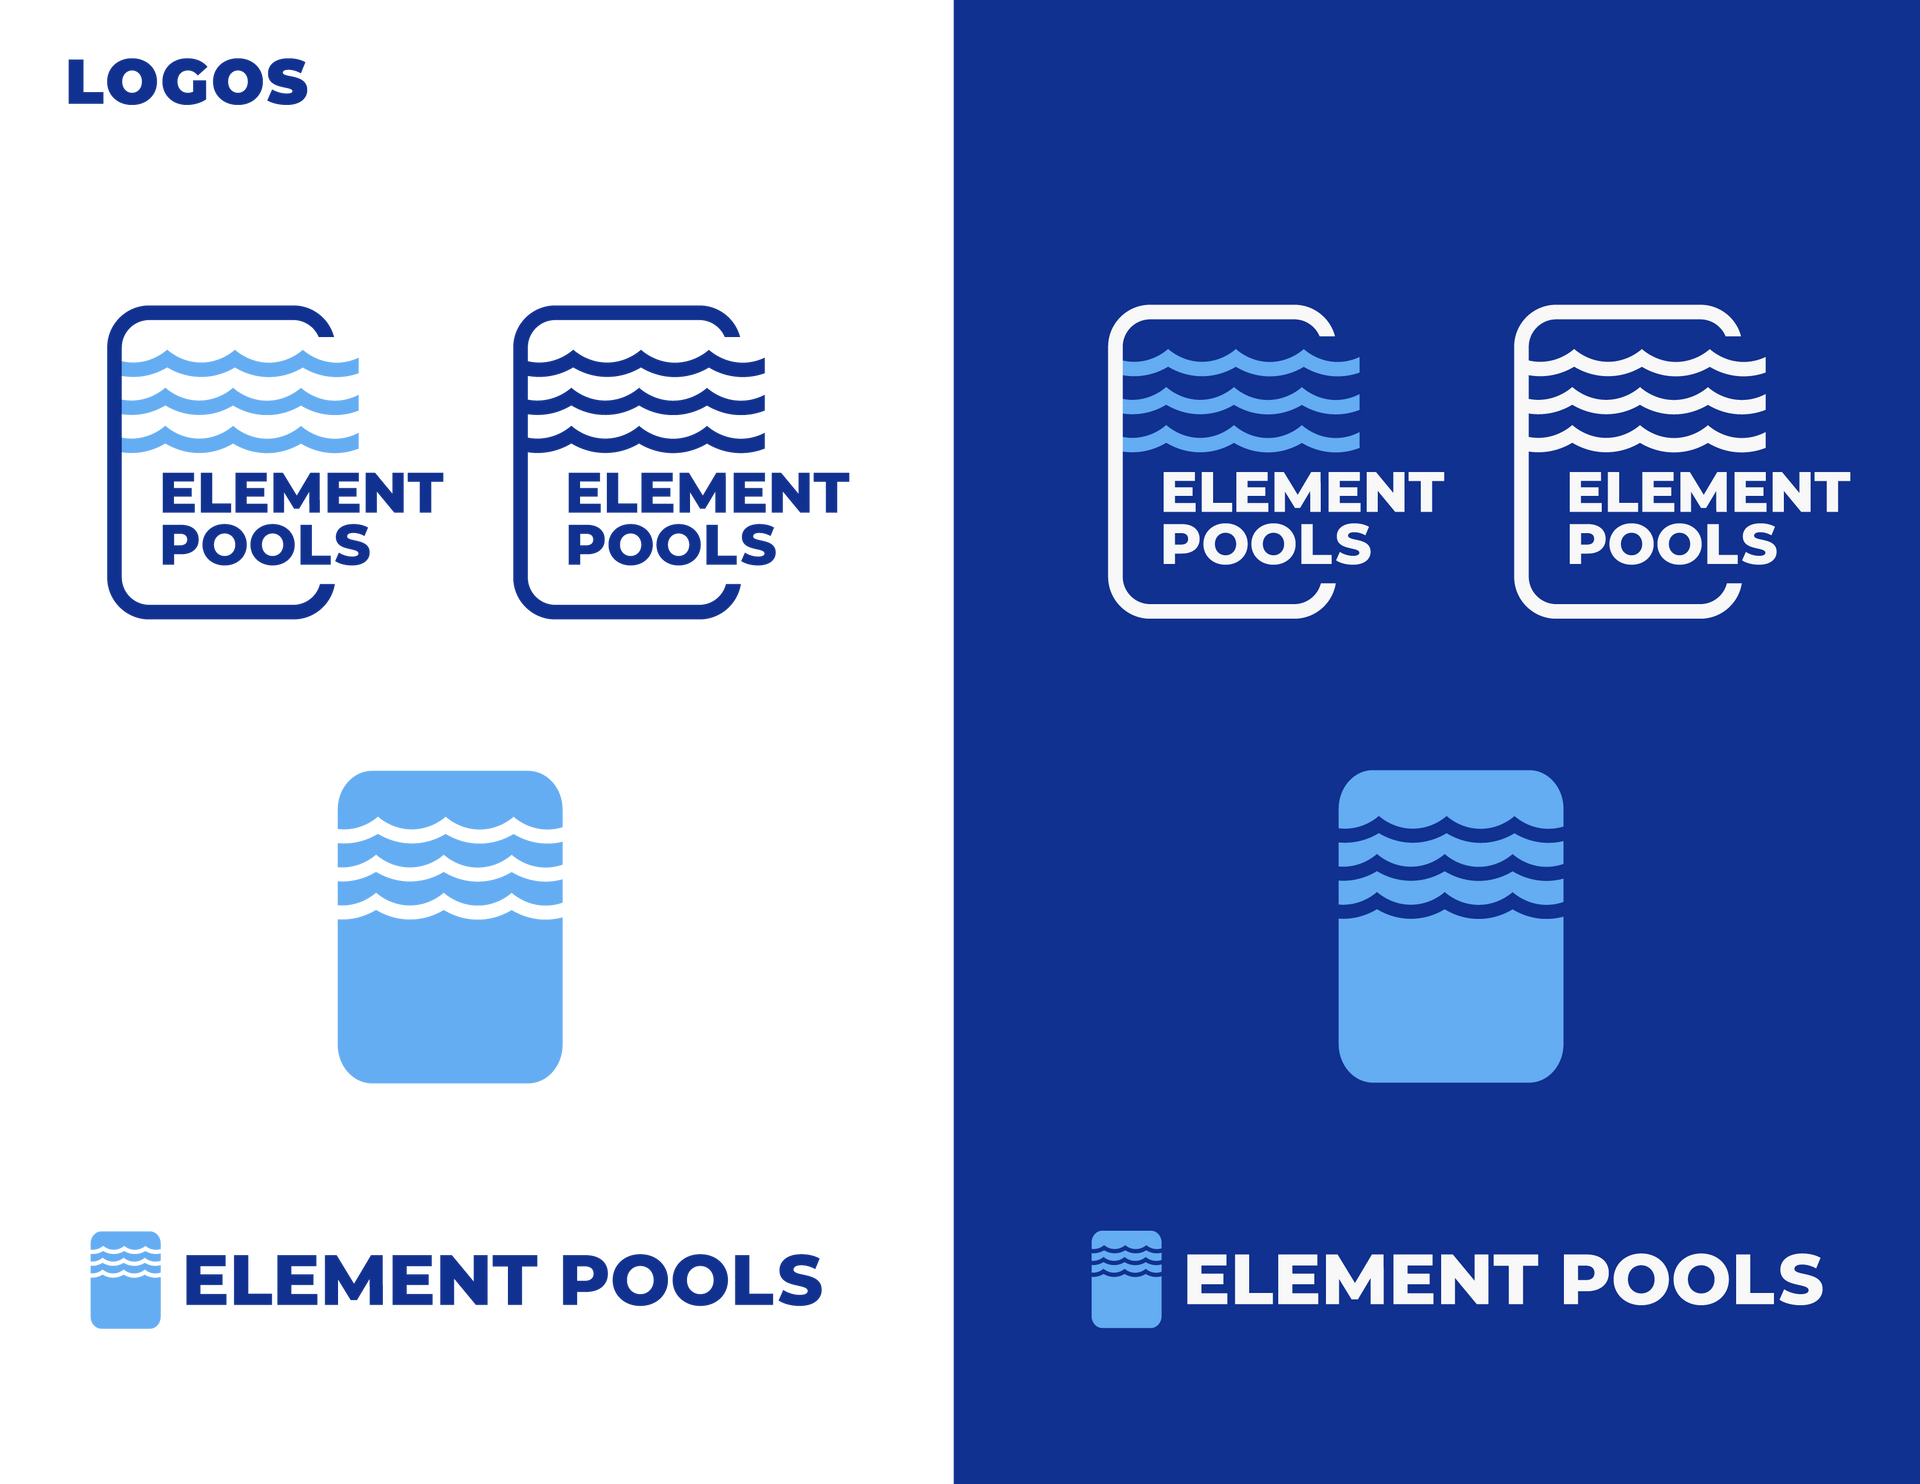 A blue and white logo for element pools